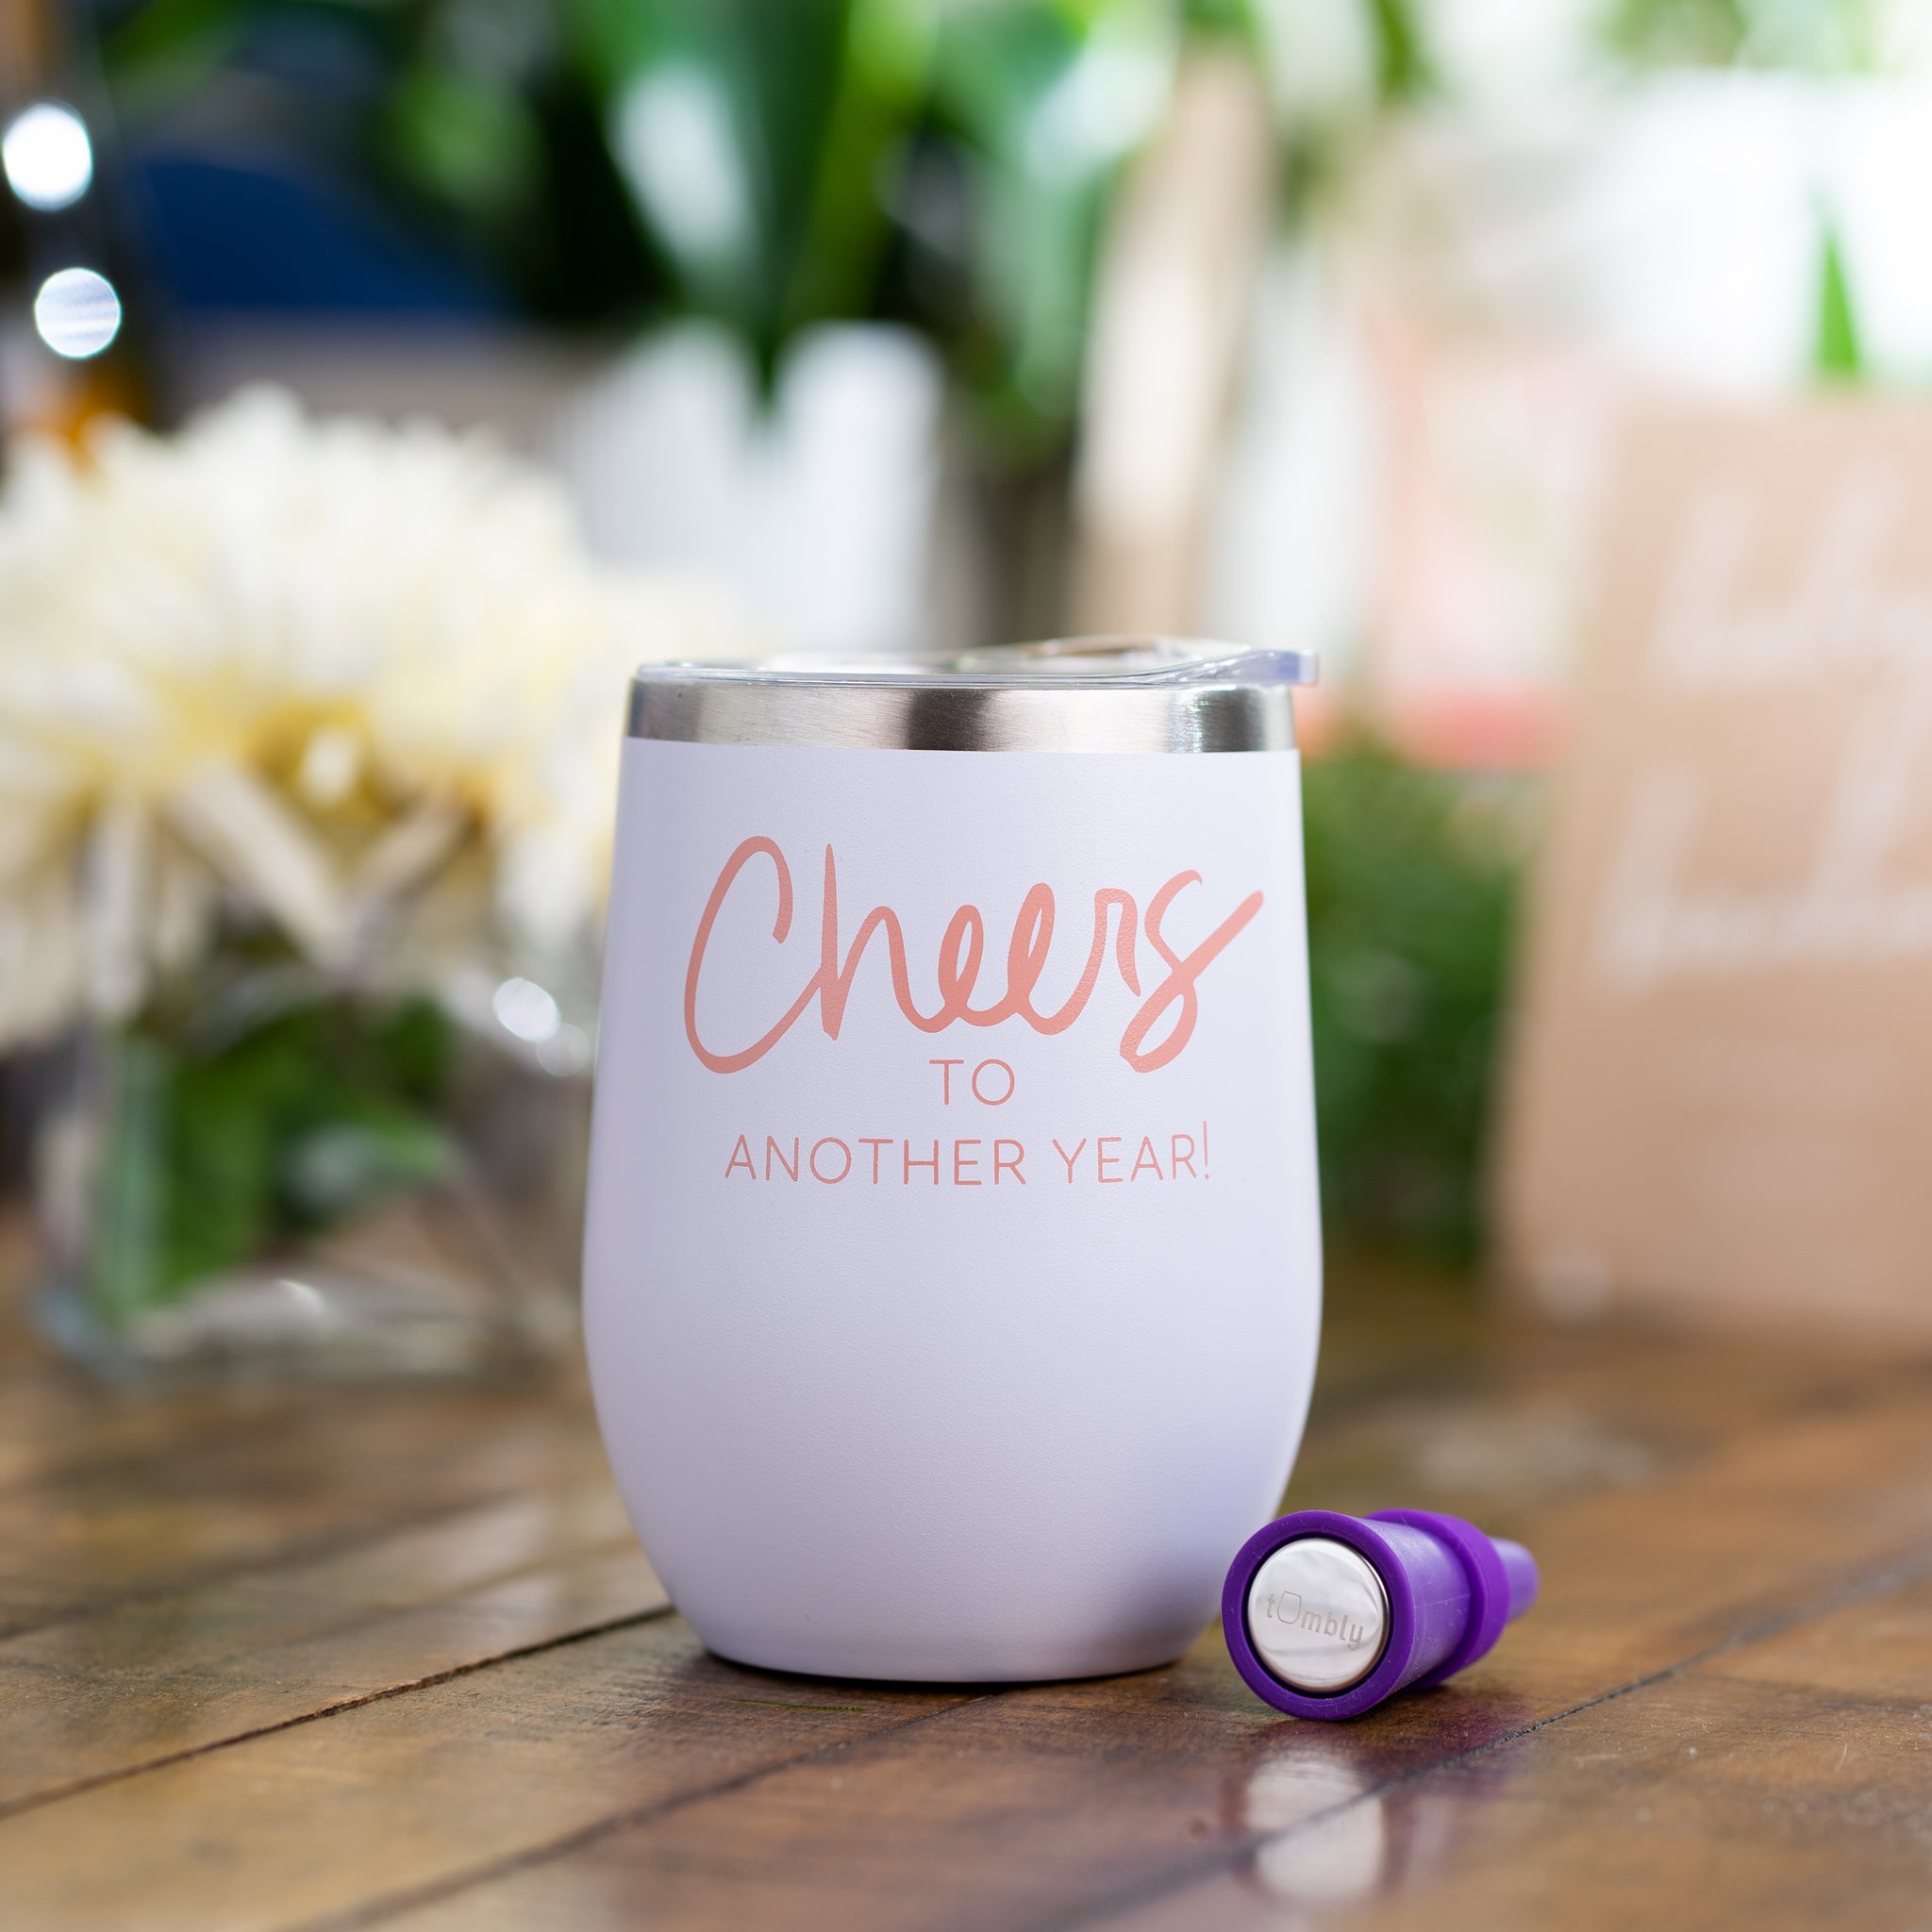 Sassy Since 1963 Wine Tumbler, Funny 60th Birthday Party Gift for Women,  Custom Name Cup for 60 Years Old Mom, Sister, Best Friend 